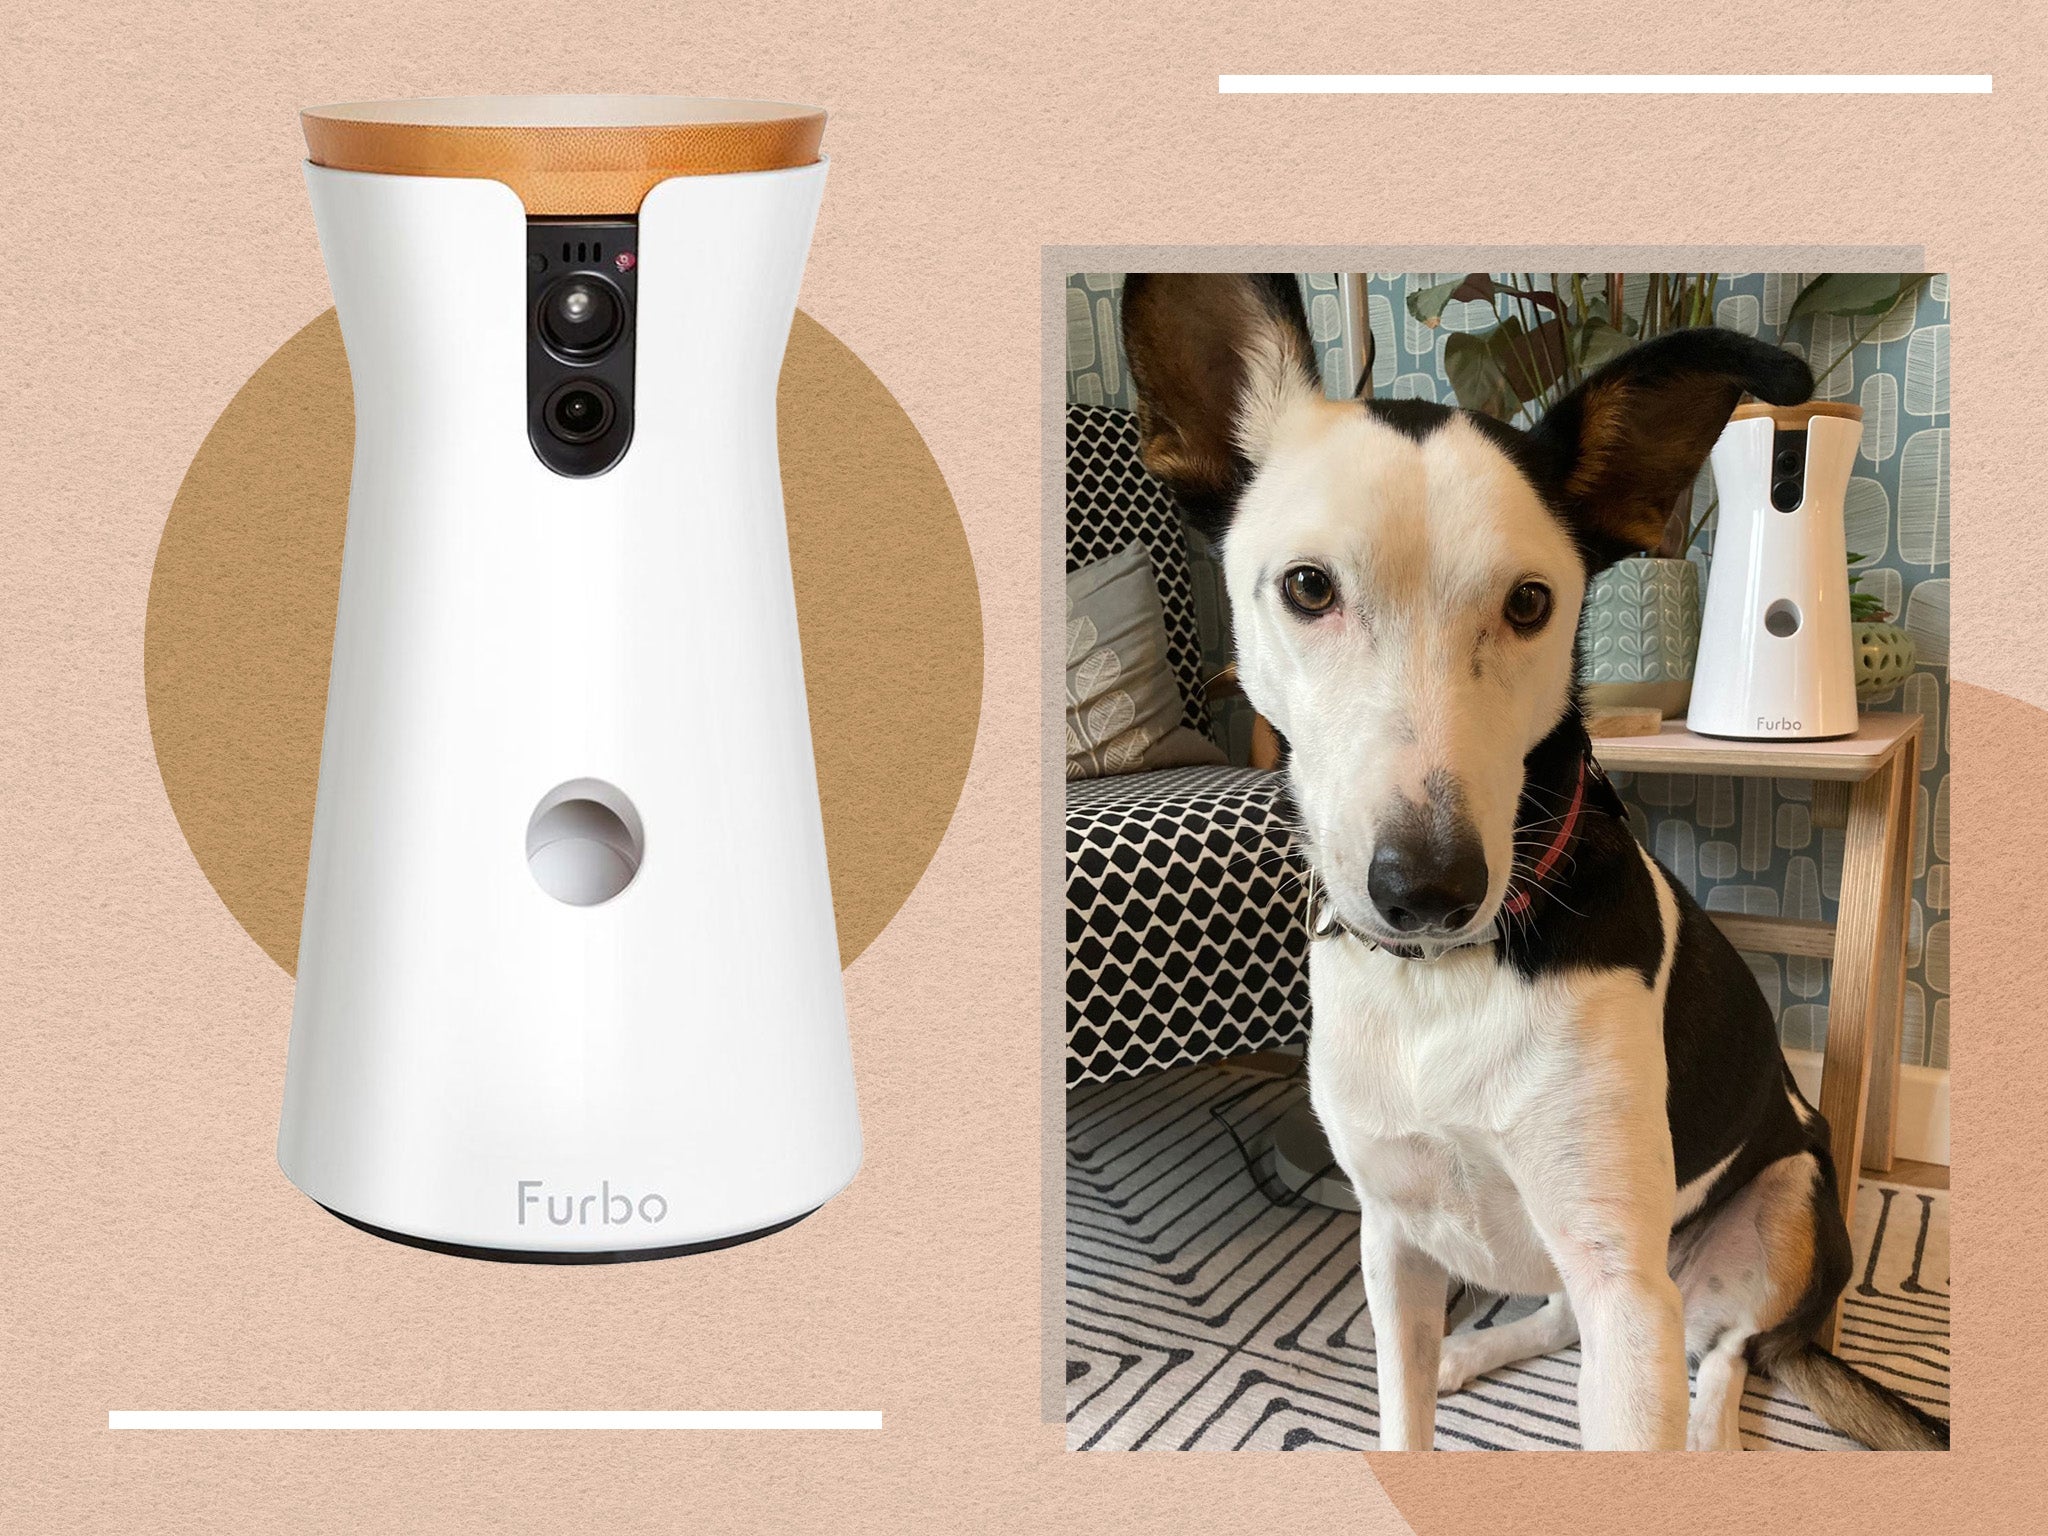 Furbo dog camera review 2022: Design, features and performance